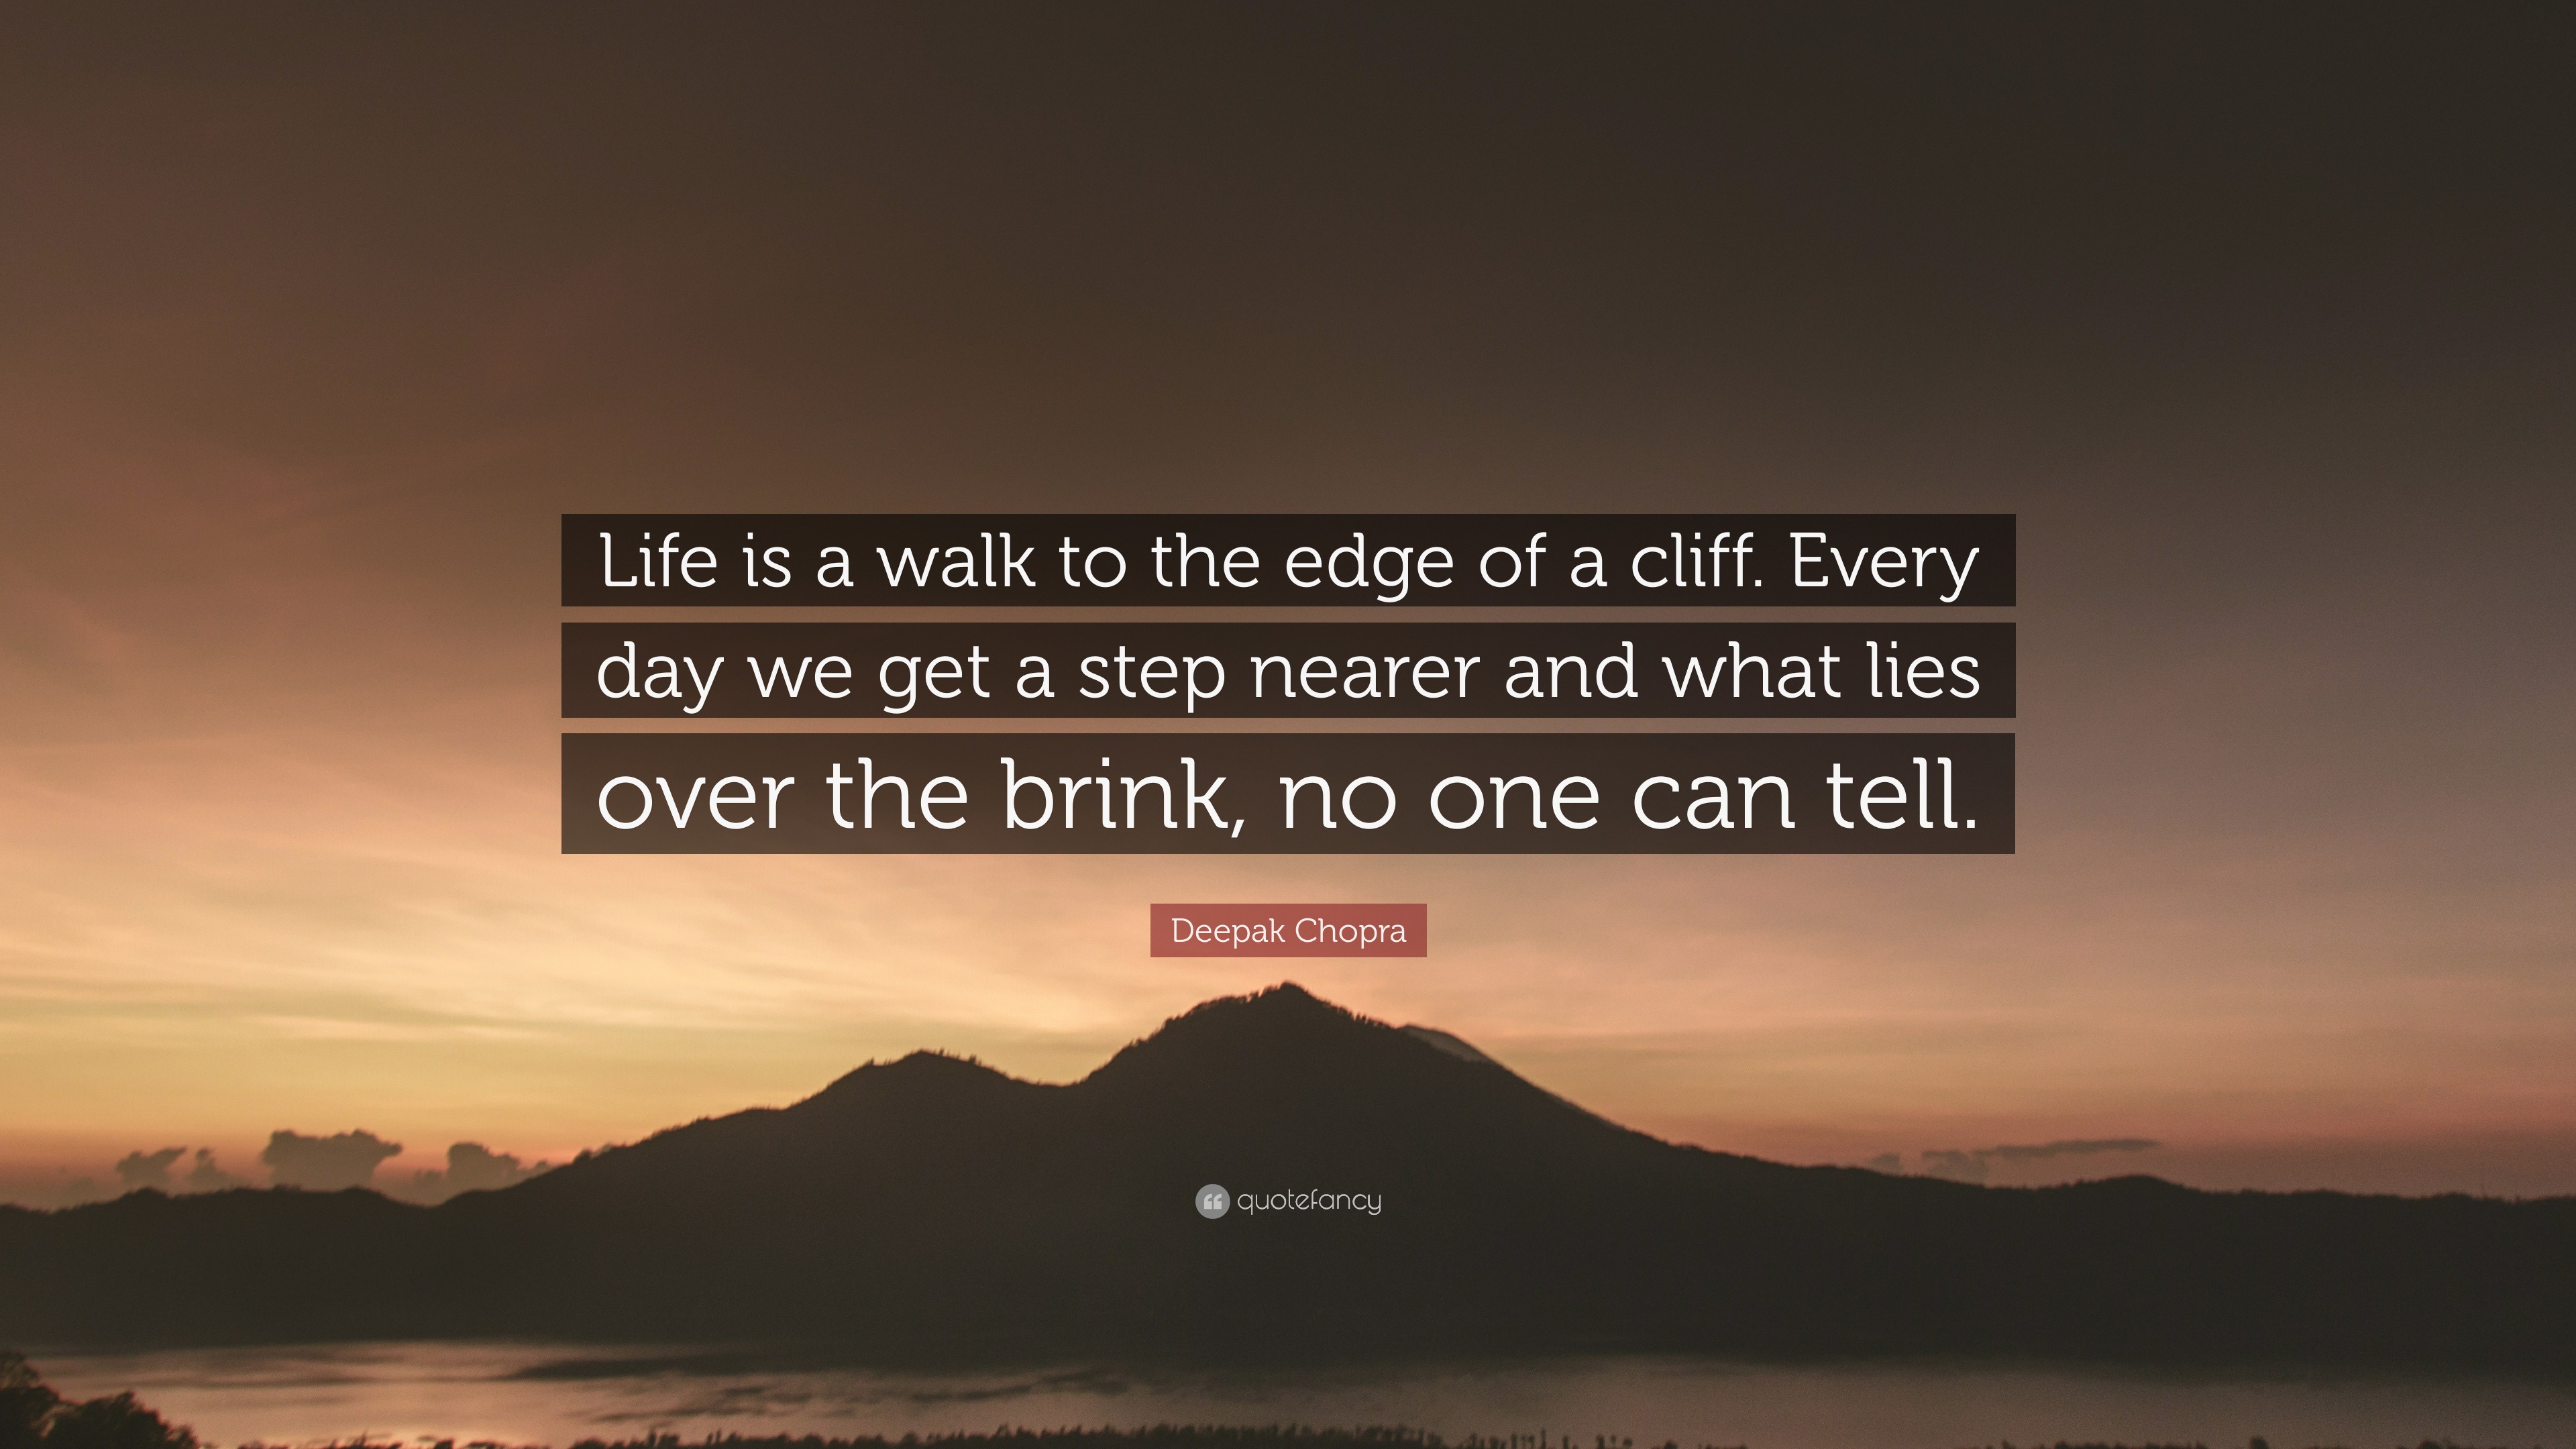 Deepak Chopra Quote Life Is A Walk To The Edge Of A Cliff Every Day We Get A Step Nearer And What Lies Over The Brink No One Can Tell 10 Wallpapers